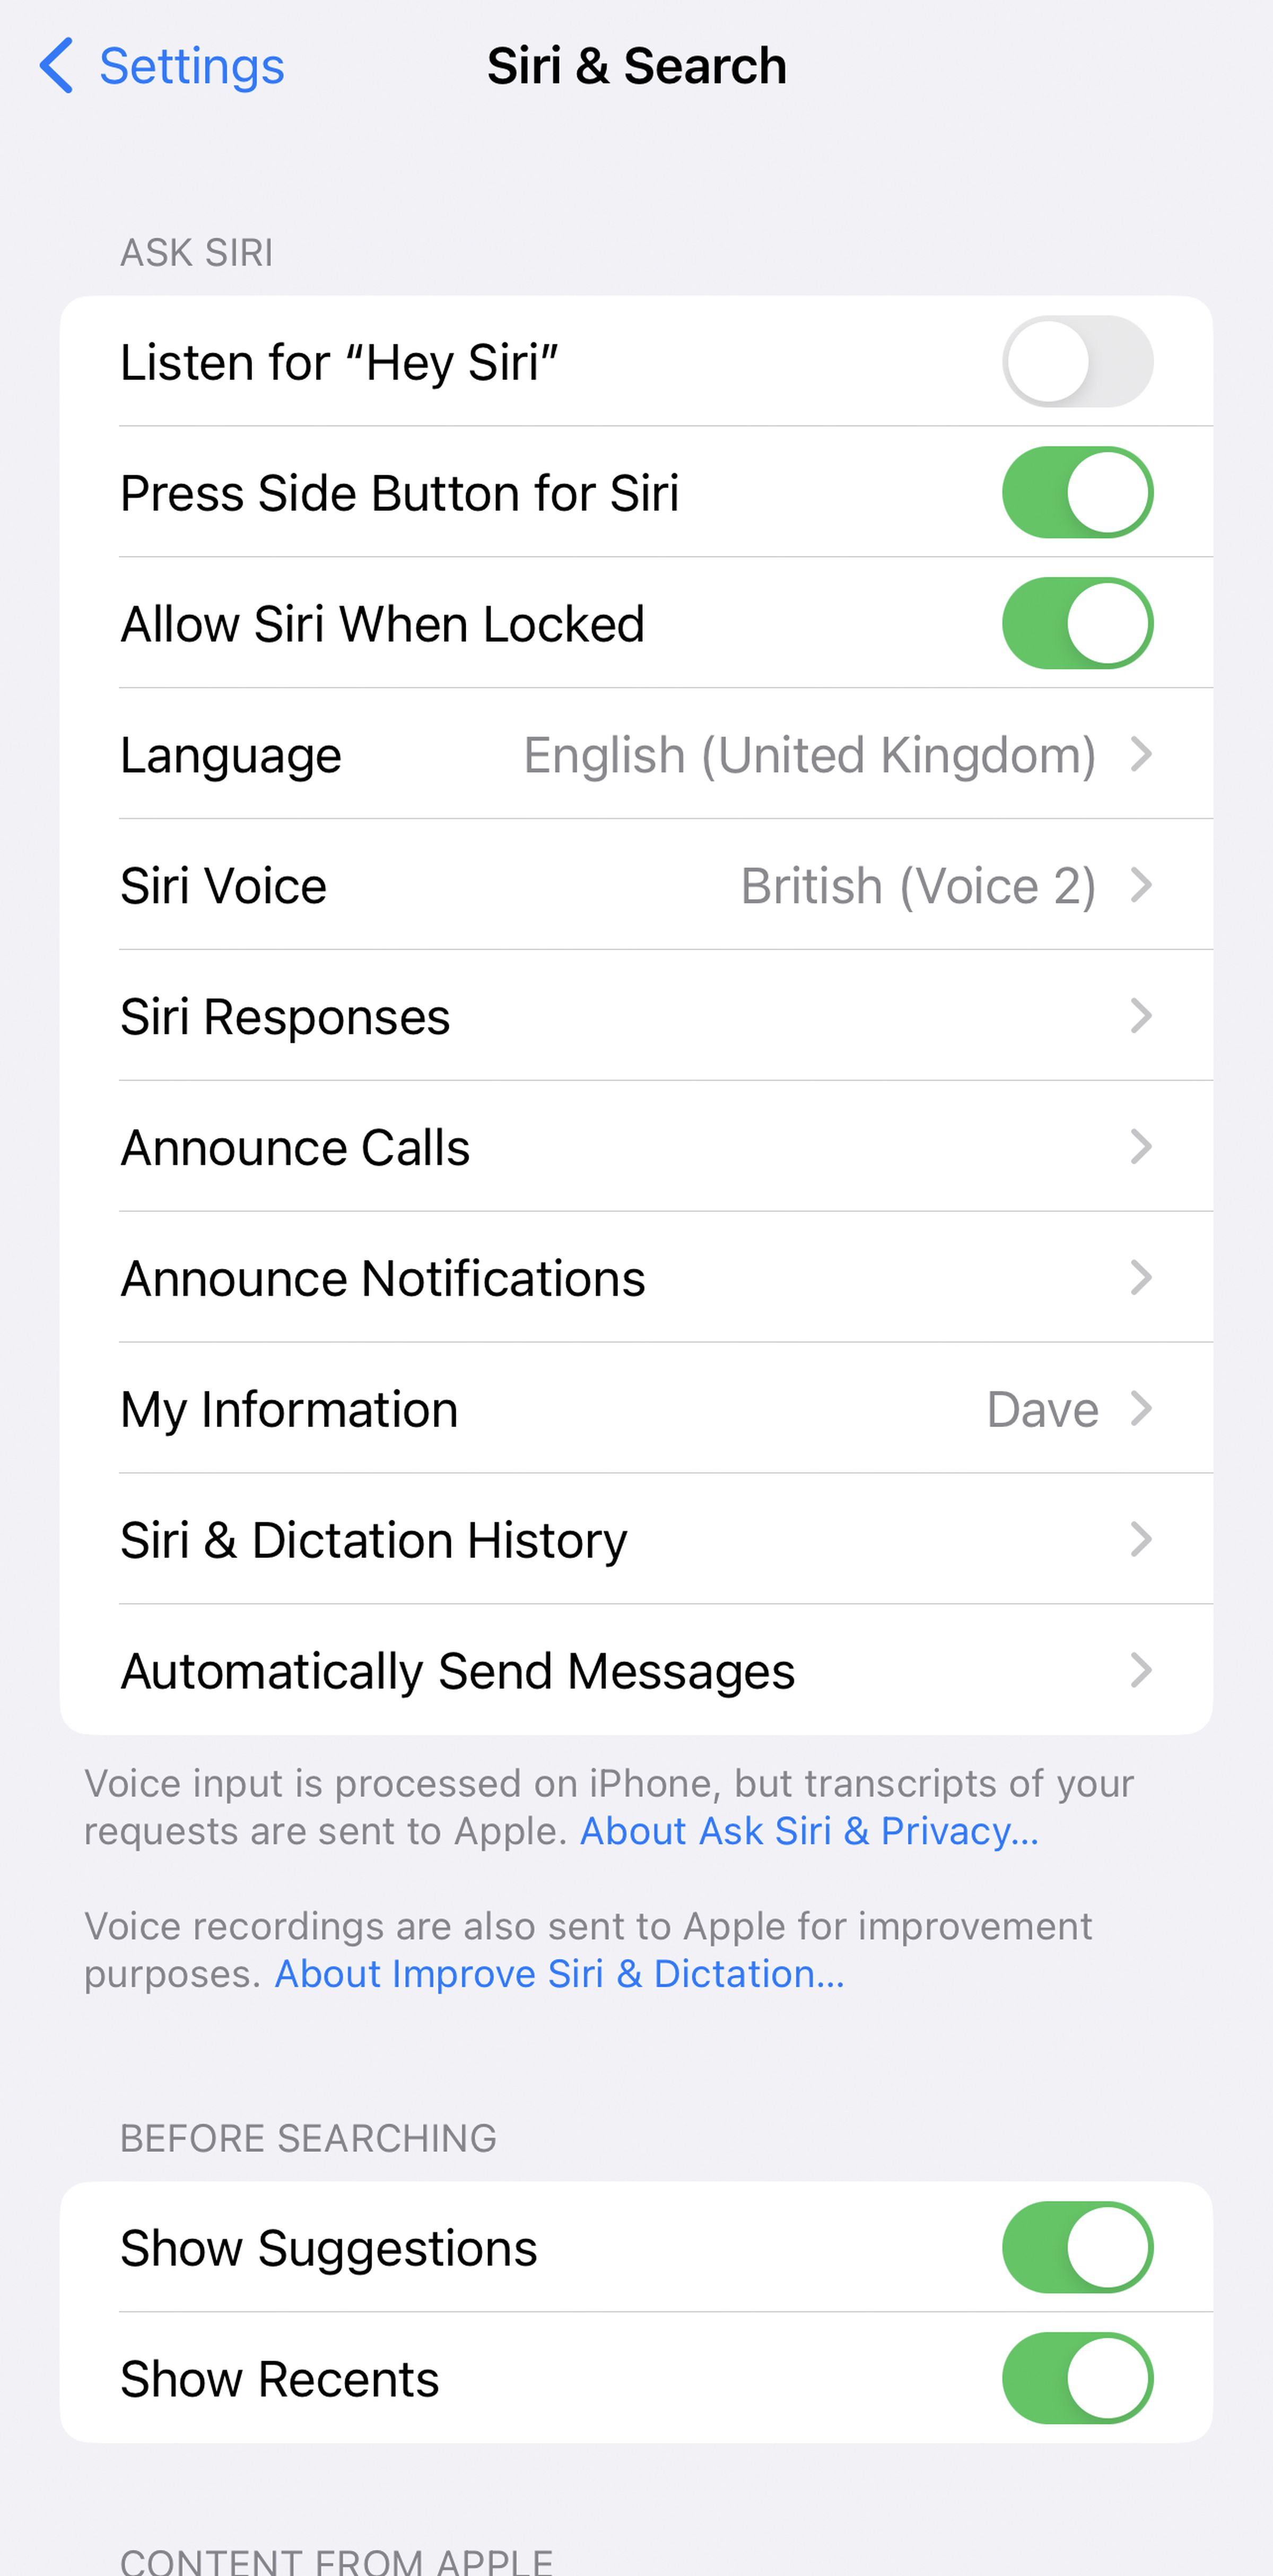 tech news Siri & Search page with a list of options including Listen to Hey Siri, Press Side Button for Siri, and Allow Siri When Locked, plus others.